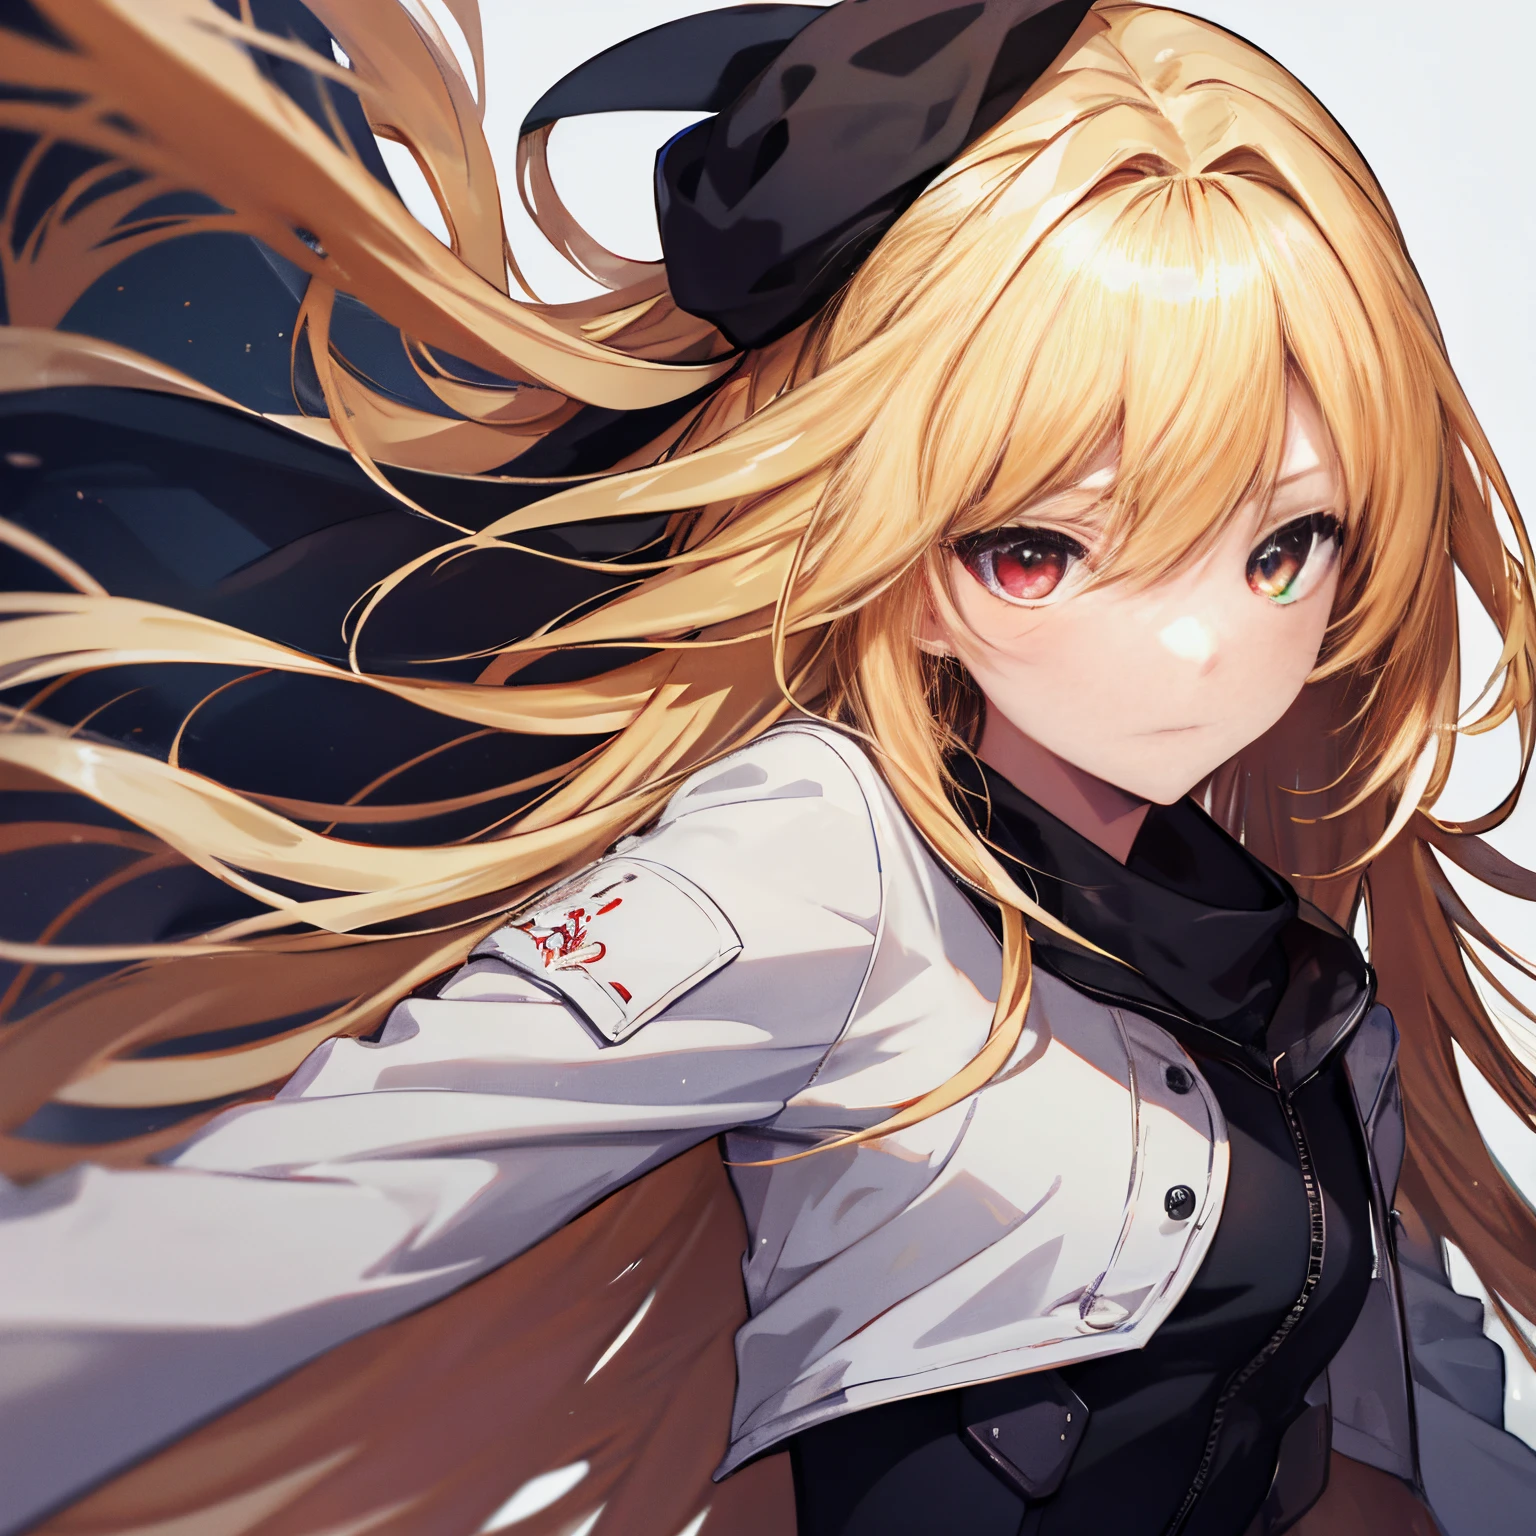 (masutepiece:1.2, Best Quality),  [girl, Manteau, expressioness, , girl with long blonde hair,red eyes, blonde anime girl with long hair ,white Jacket comes off, Upper body] Gray white background、,